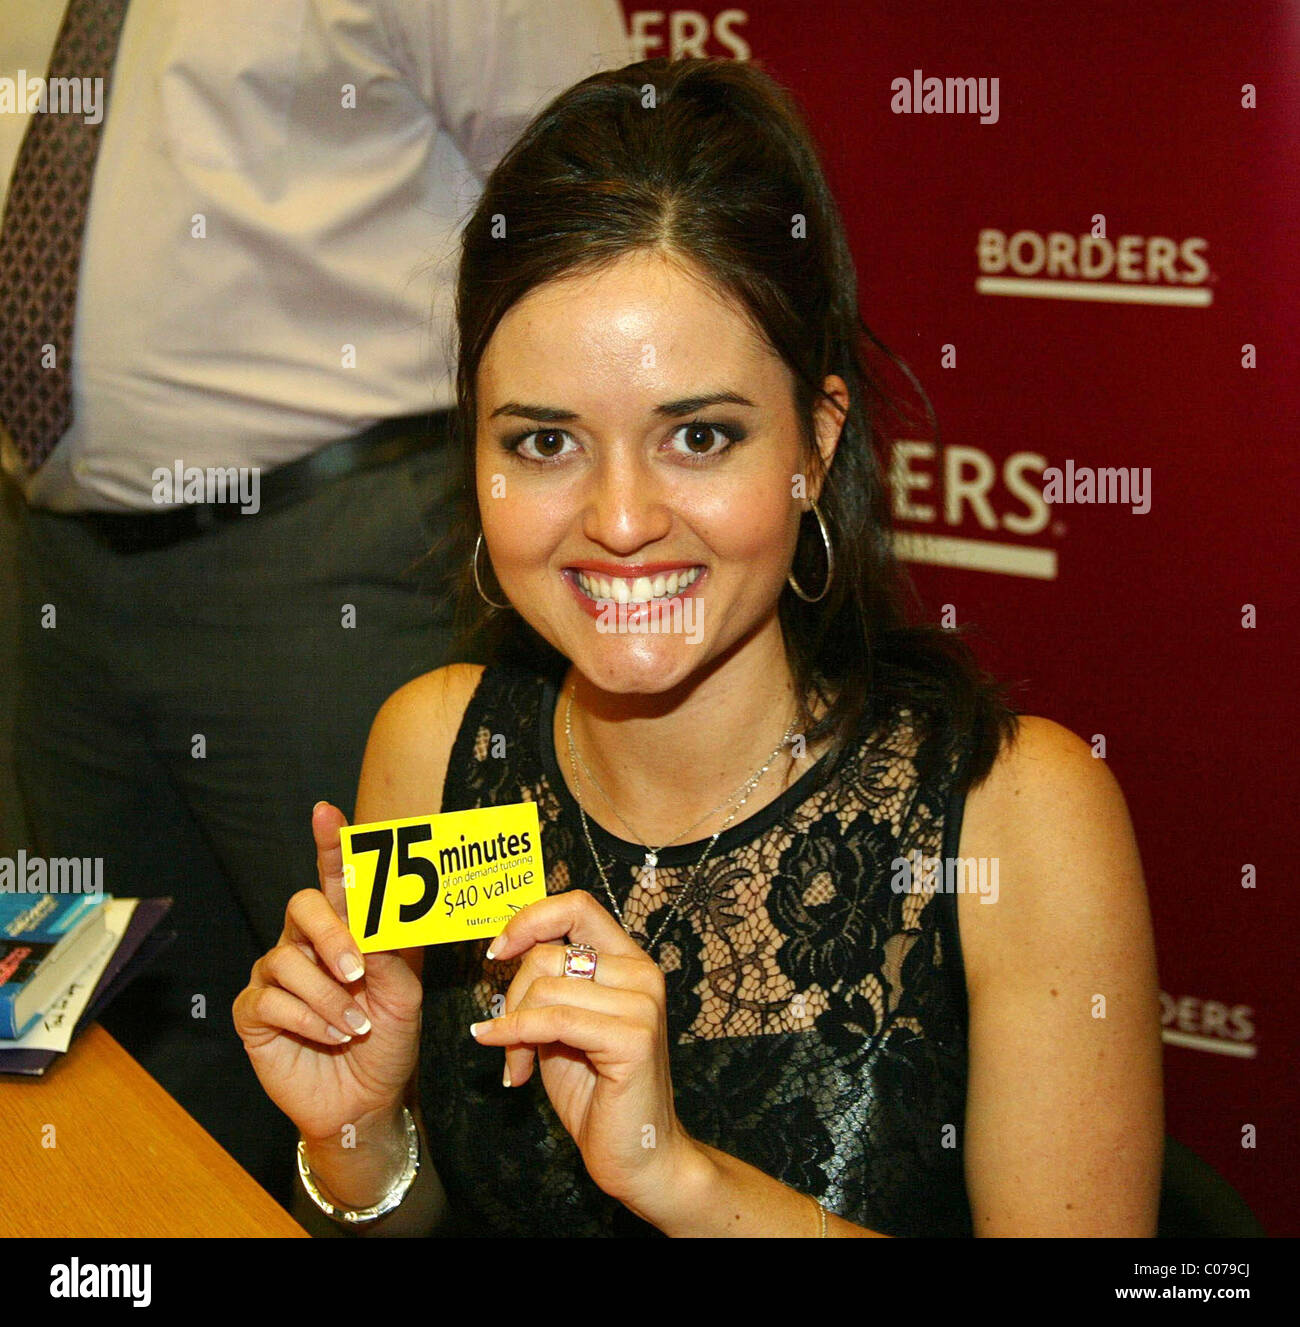 Danica Mckellar Signs Copies Of Her New Book Math Doesnt Suck At The 2974